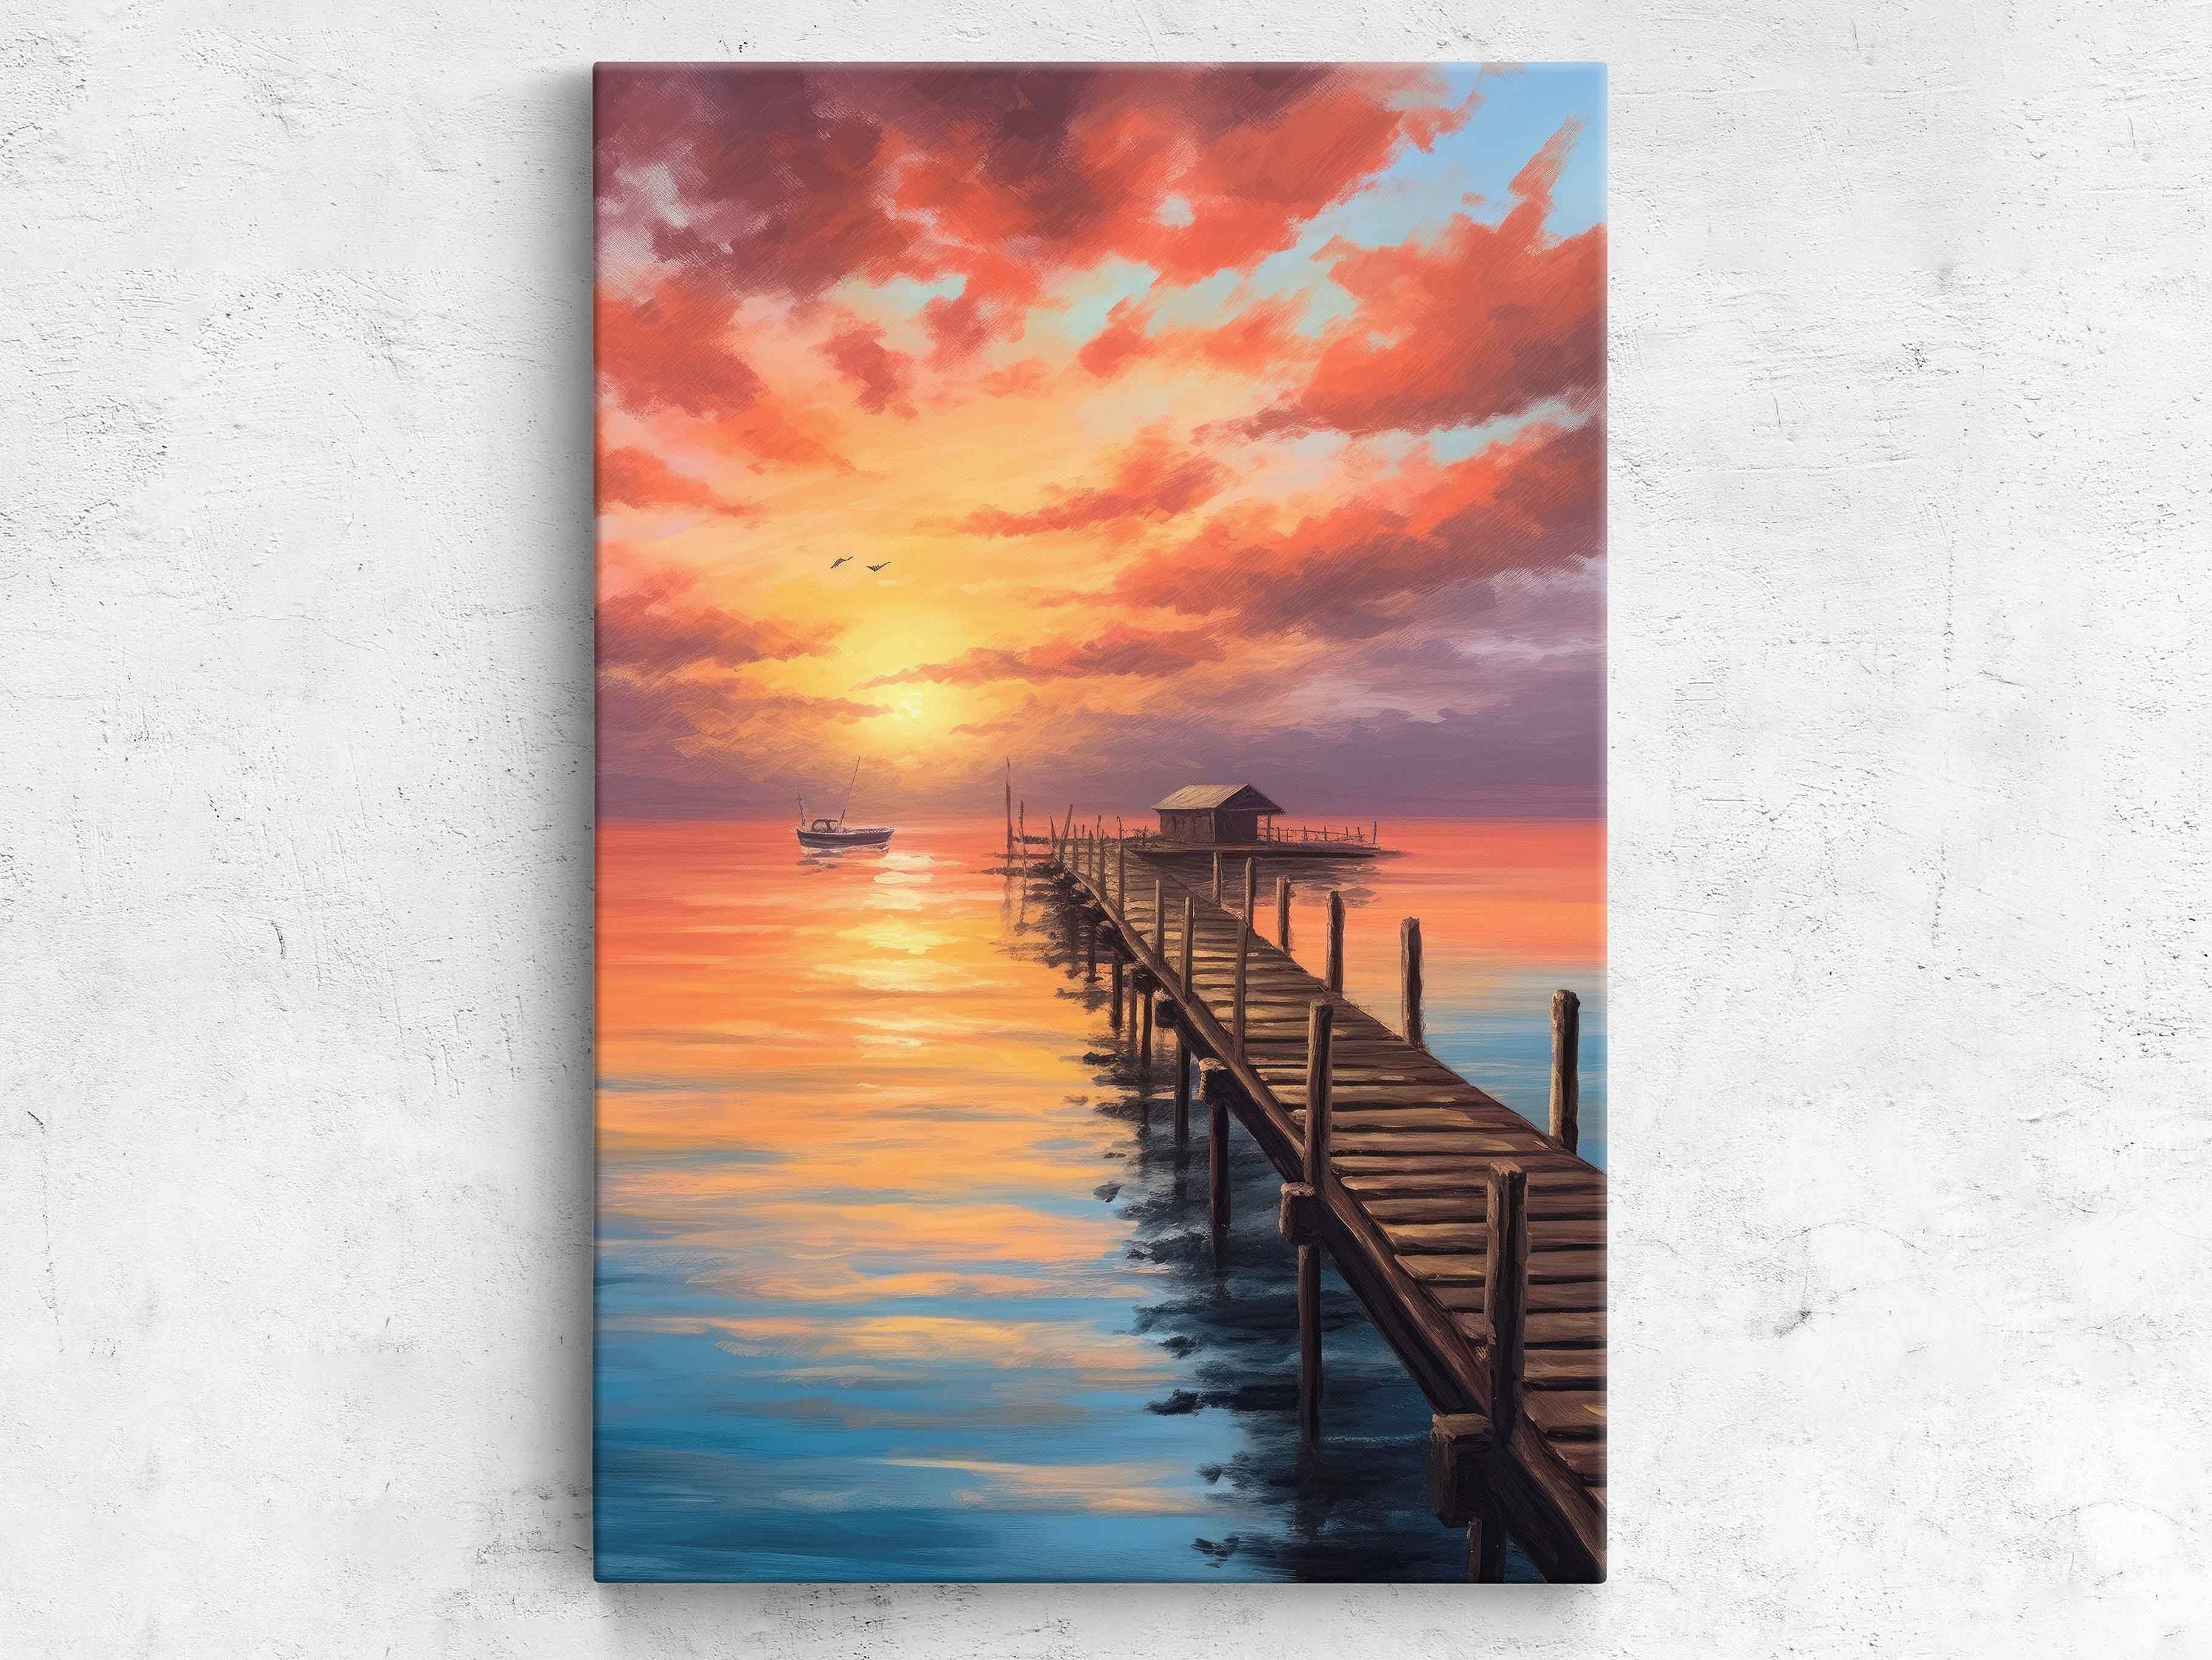 Sunset fishing pier at lake Finland Canvas Wall Art Vertical Decor for  Living Room Bedroom Bathroom Long Framed Pictures Poster Paintings Prints 3